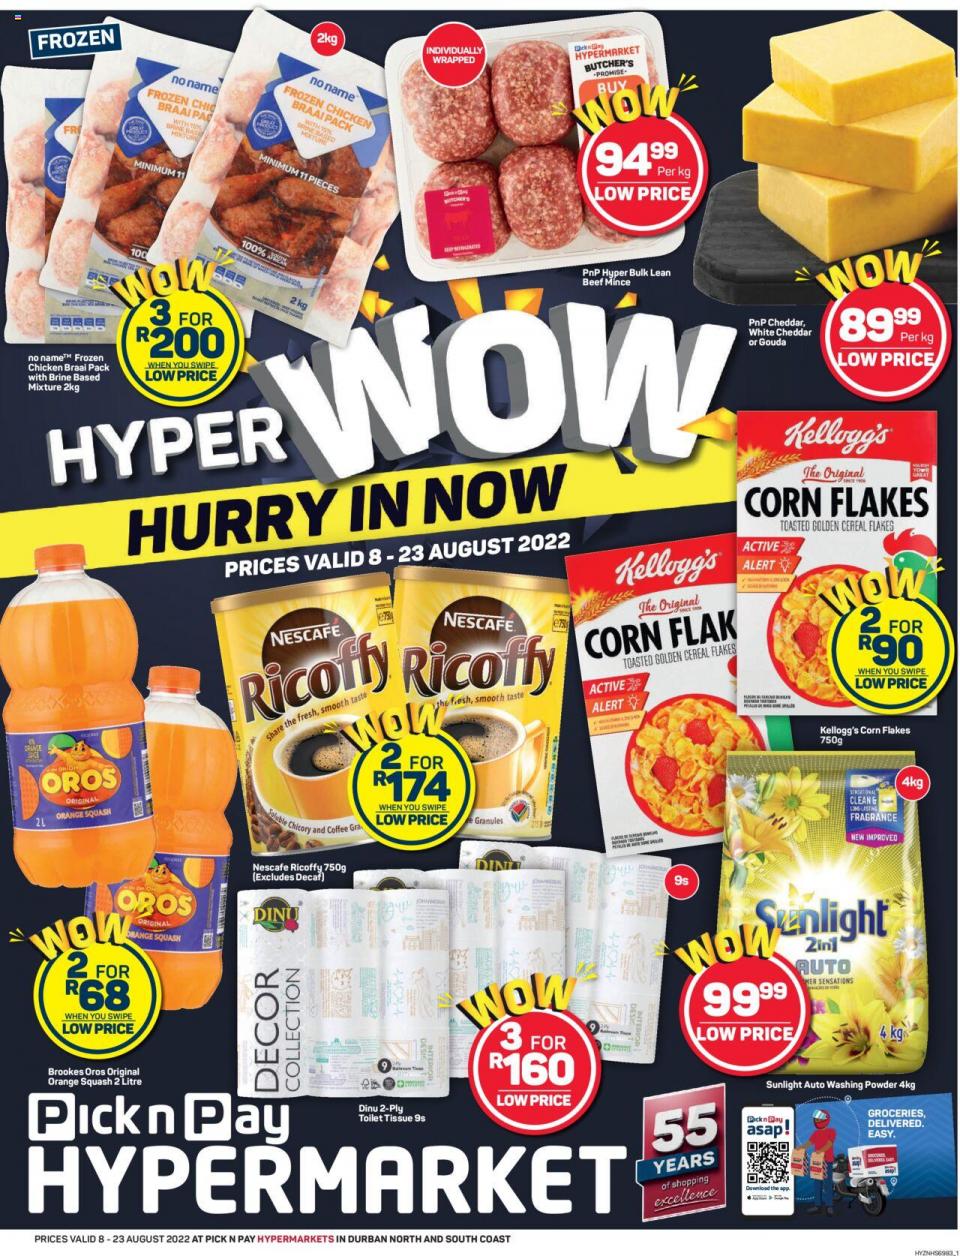 Pick n Pay Specials Hyper 8 – 23 August 2022